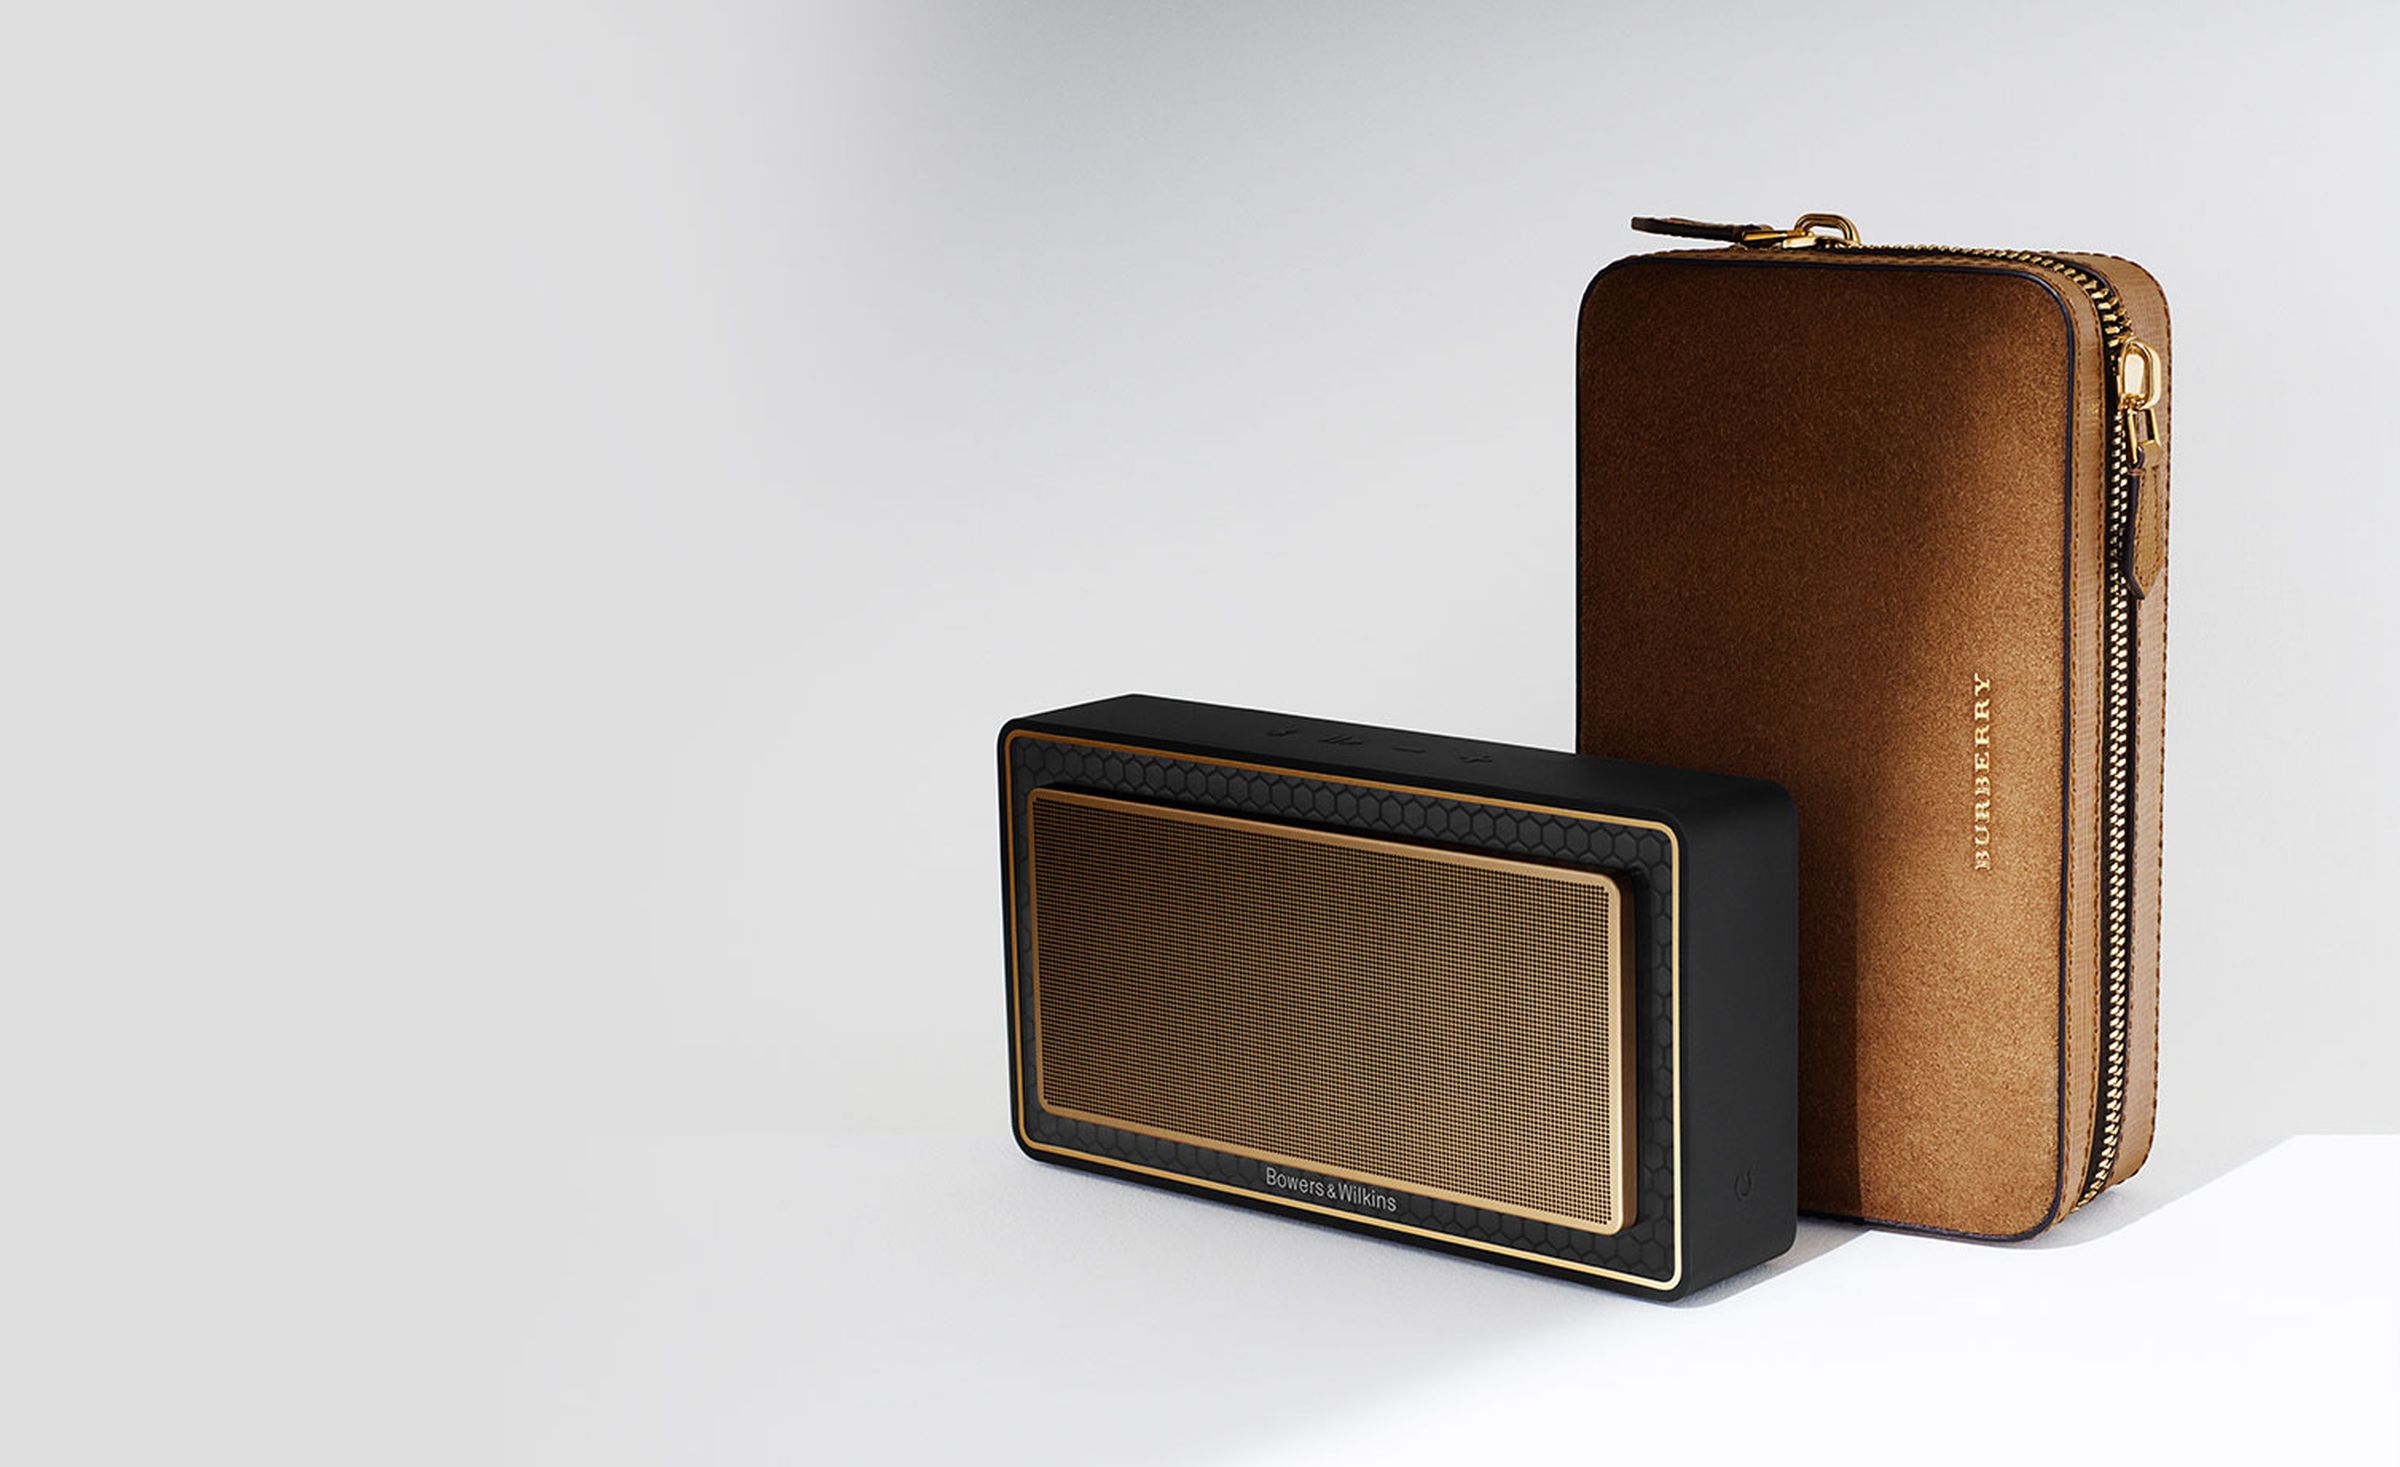 Bowers & Wilkins T7 Gold Edition Burberry Bluetooth speaker